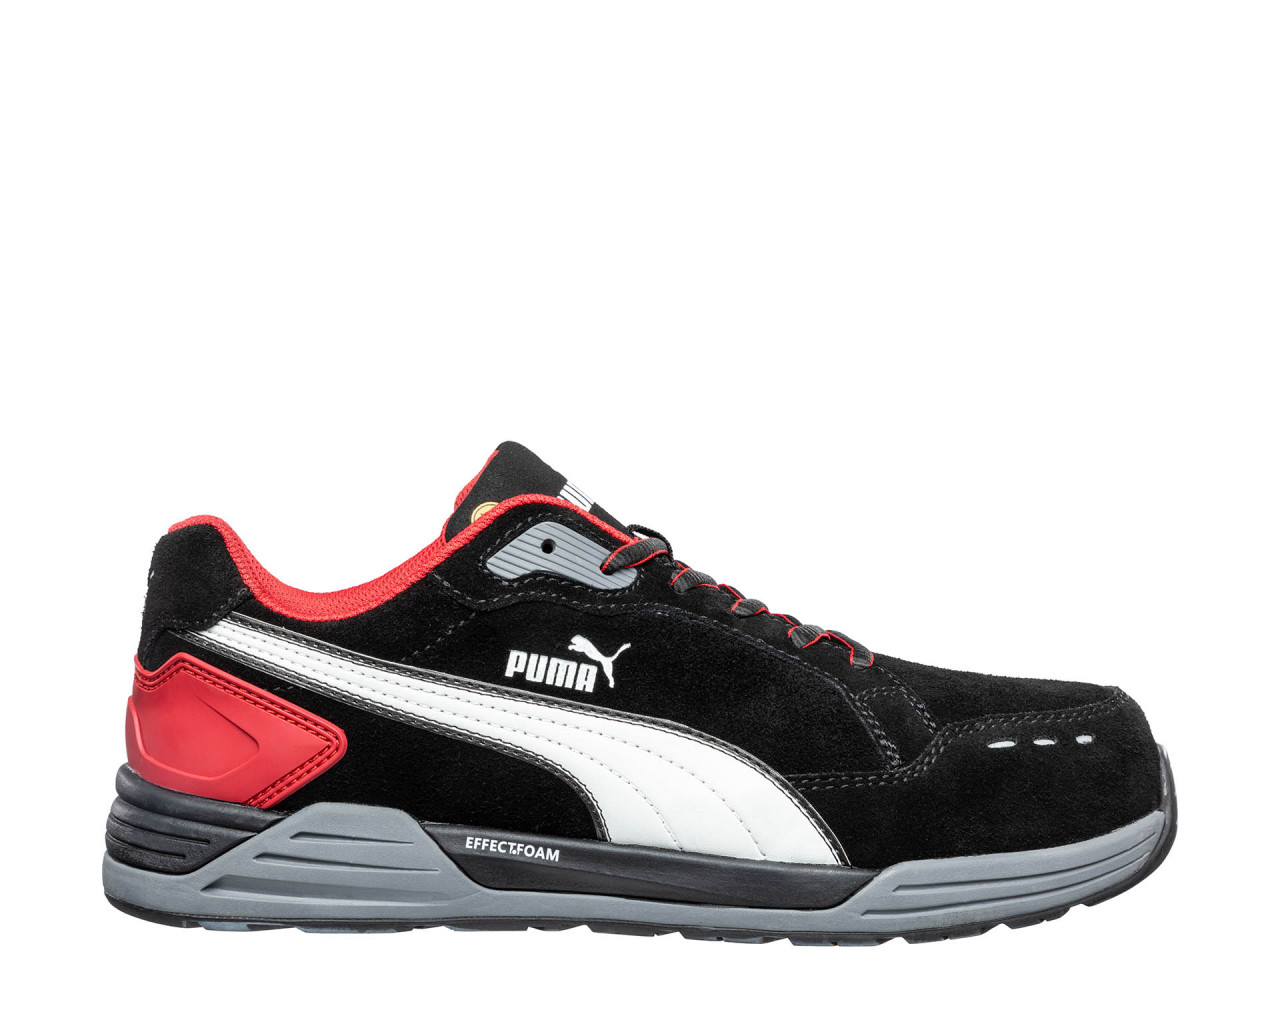 LOW BLK/RED | safety ESD SRC HRO Safety SAFETY PUMA AIRTWIST English S3 Puma shoes